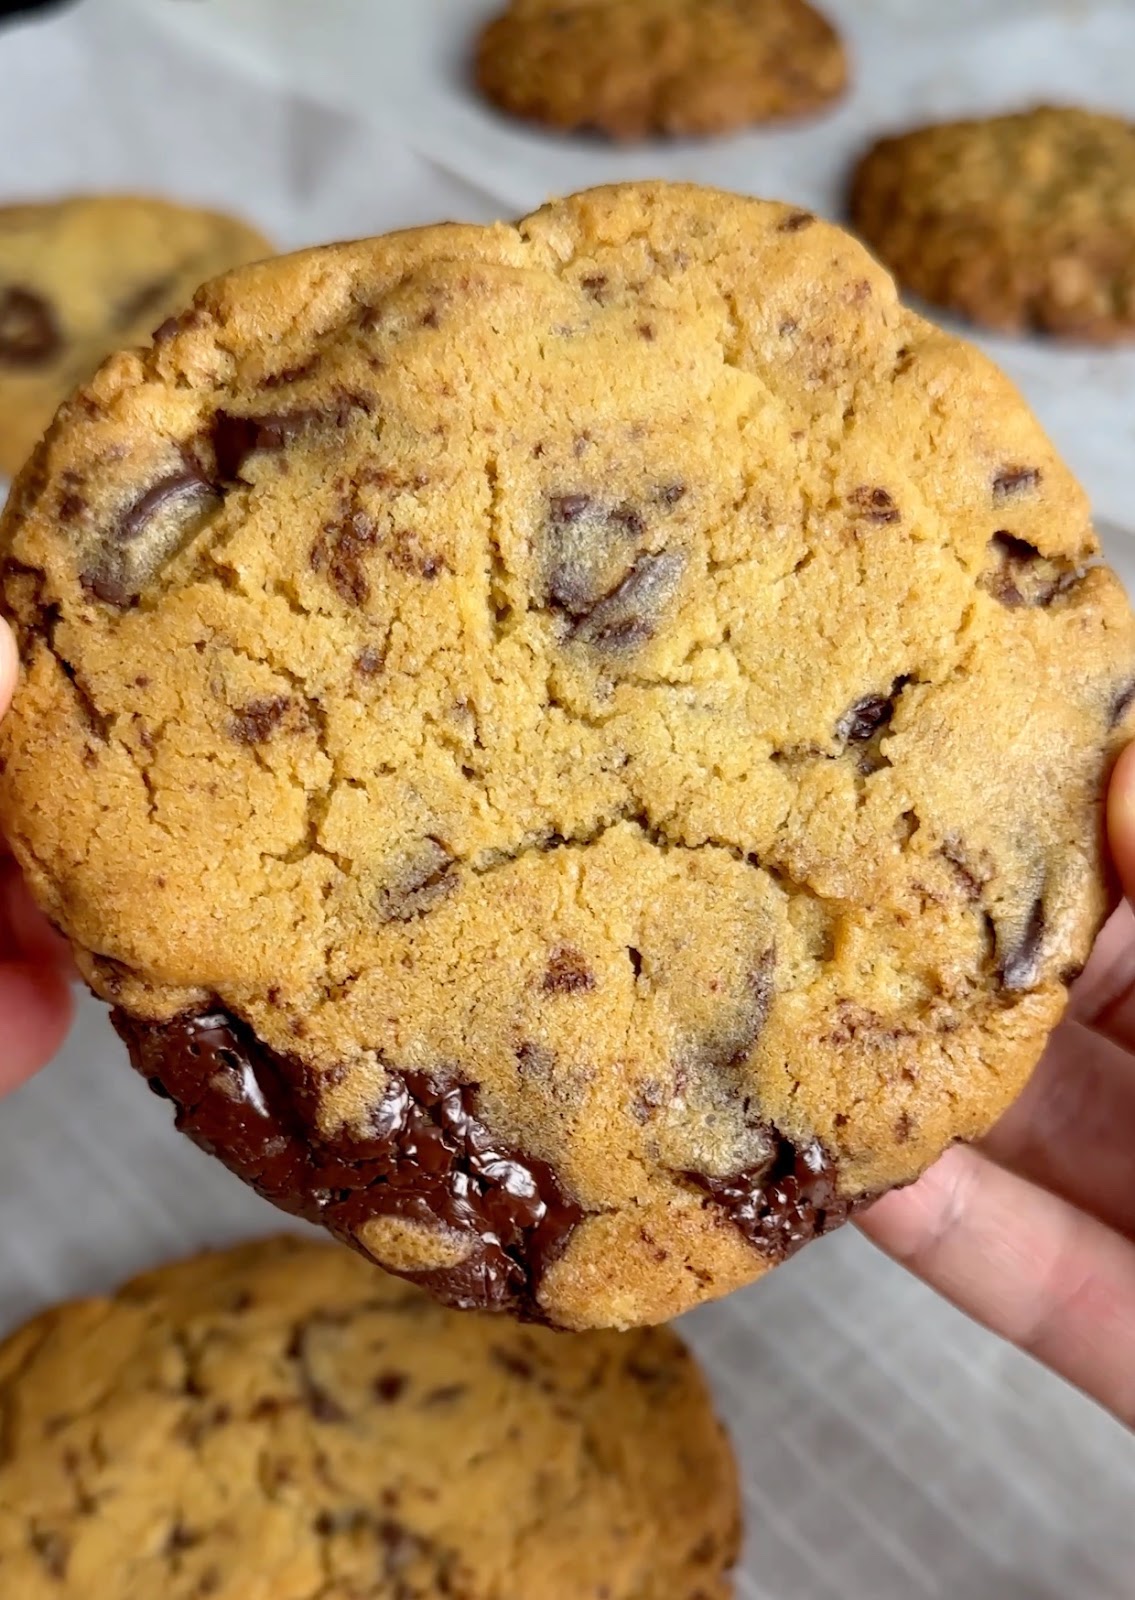 Chocolate Chip Cookies Recipe - NYT Cooking